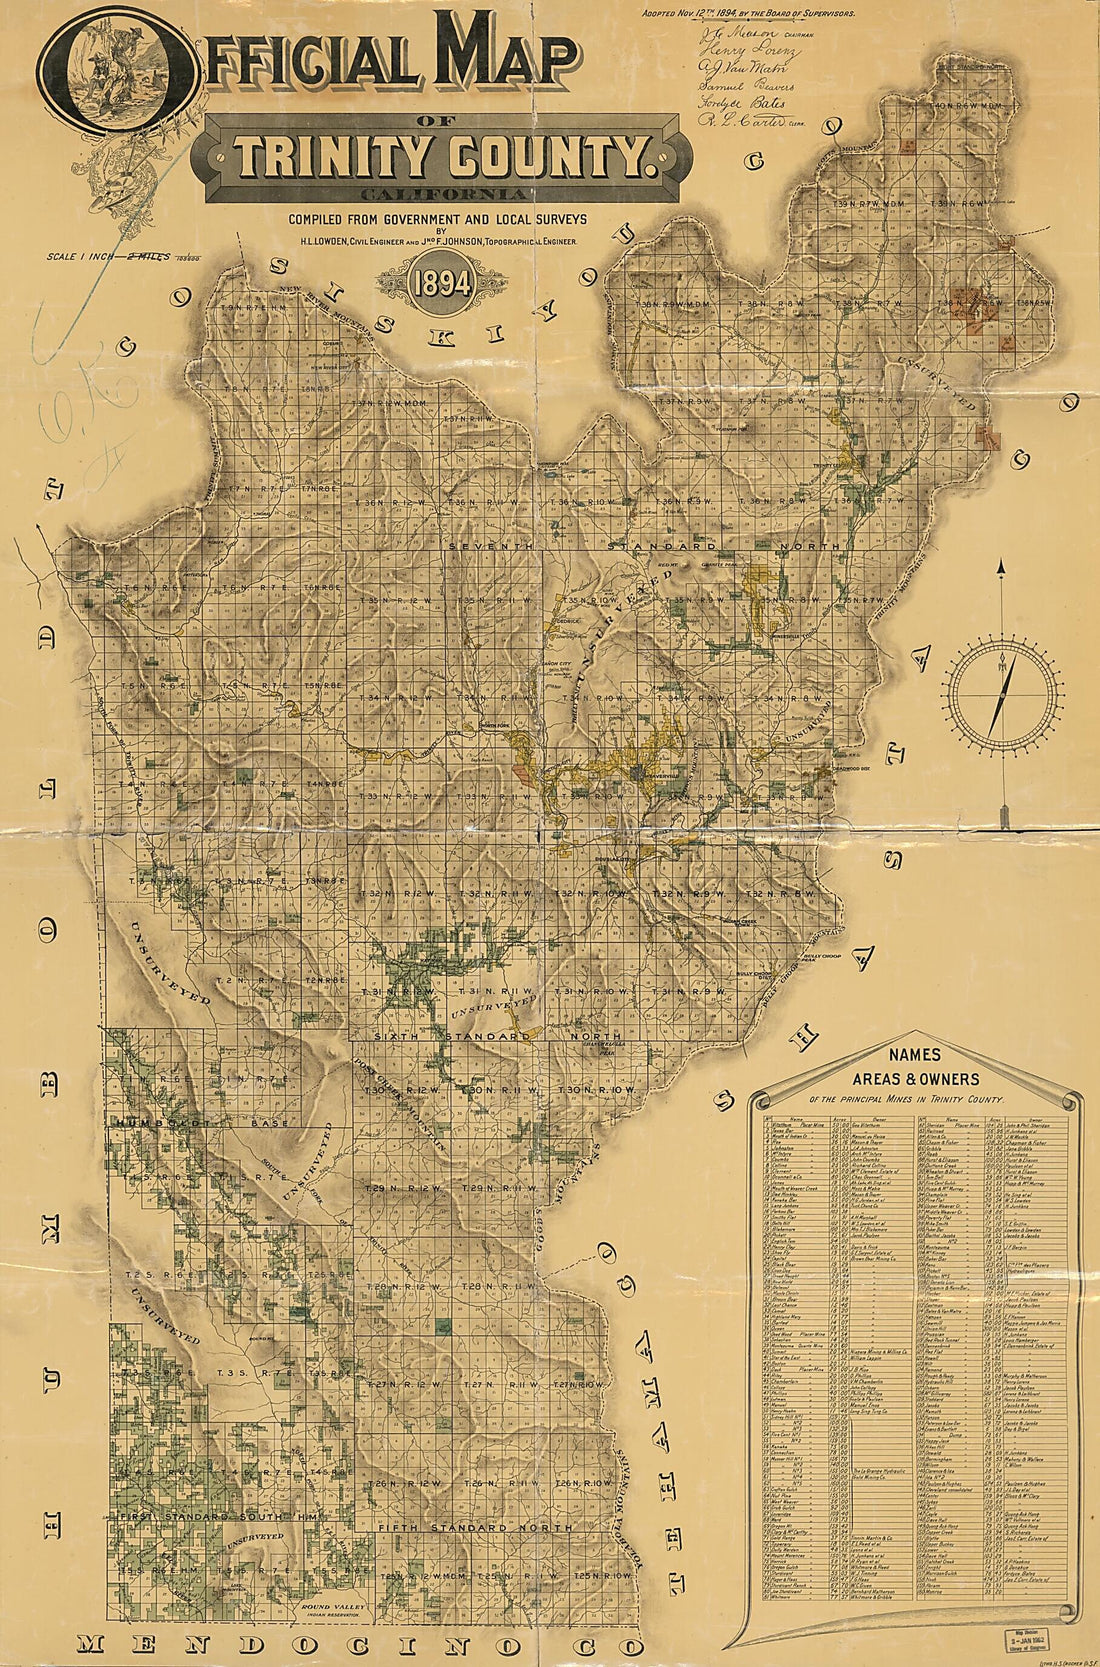 This old map of Official Map of Trinity County, California : Compiled from Government and Local Surveys from 1894 was created by  H.S. Crocker &amp; Co, Jno. F. (John F.) Johnson, Henry L. Lowden in 1894